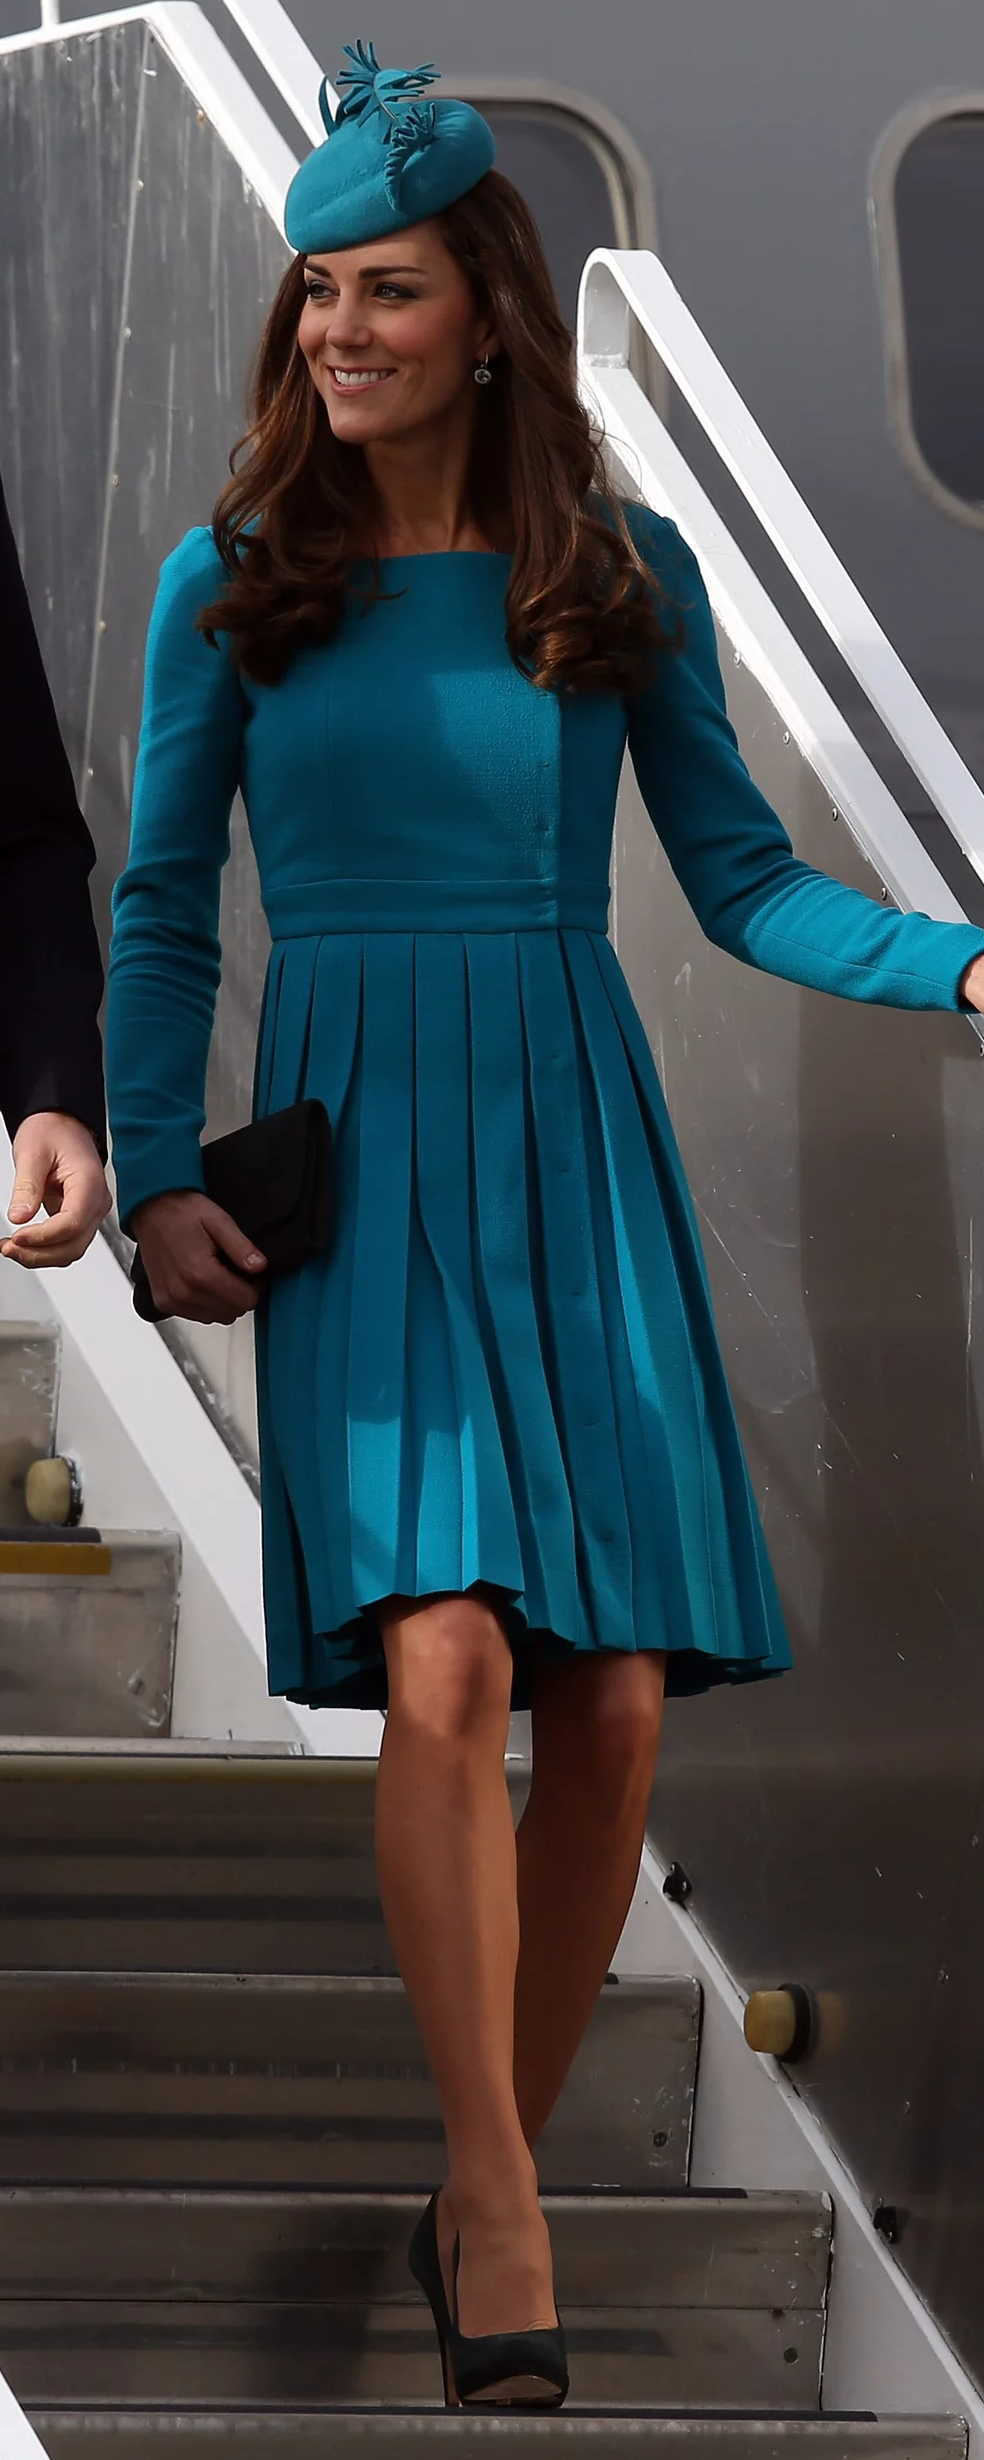 Jane Taylor Dolly Hat in Teal as seen on Kate Middleton, The Duchess of Cambridge.